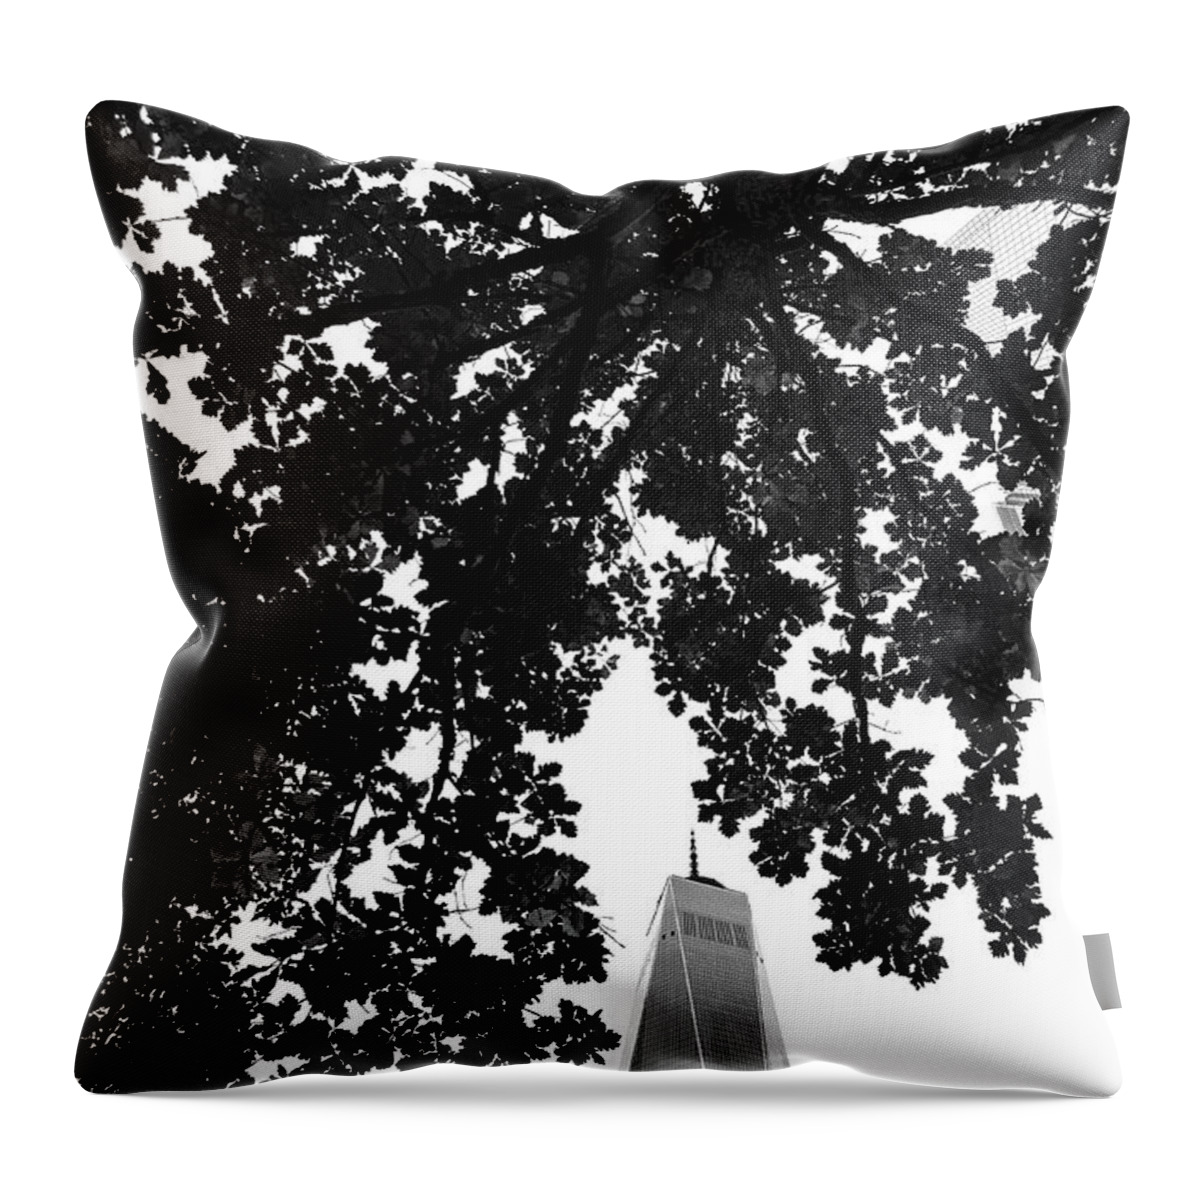 One Throw Pillow featuring the photograph An Architect's Poem by Peter Hull